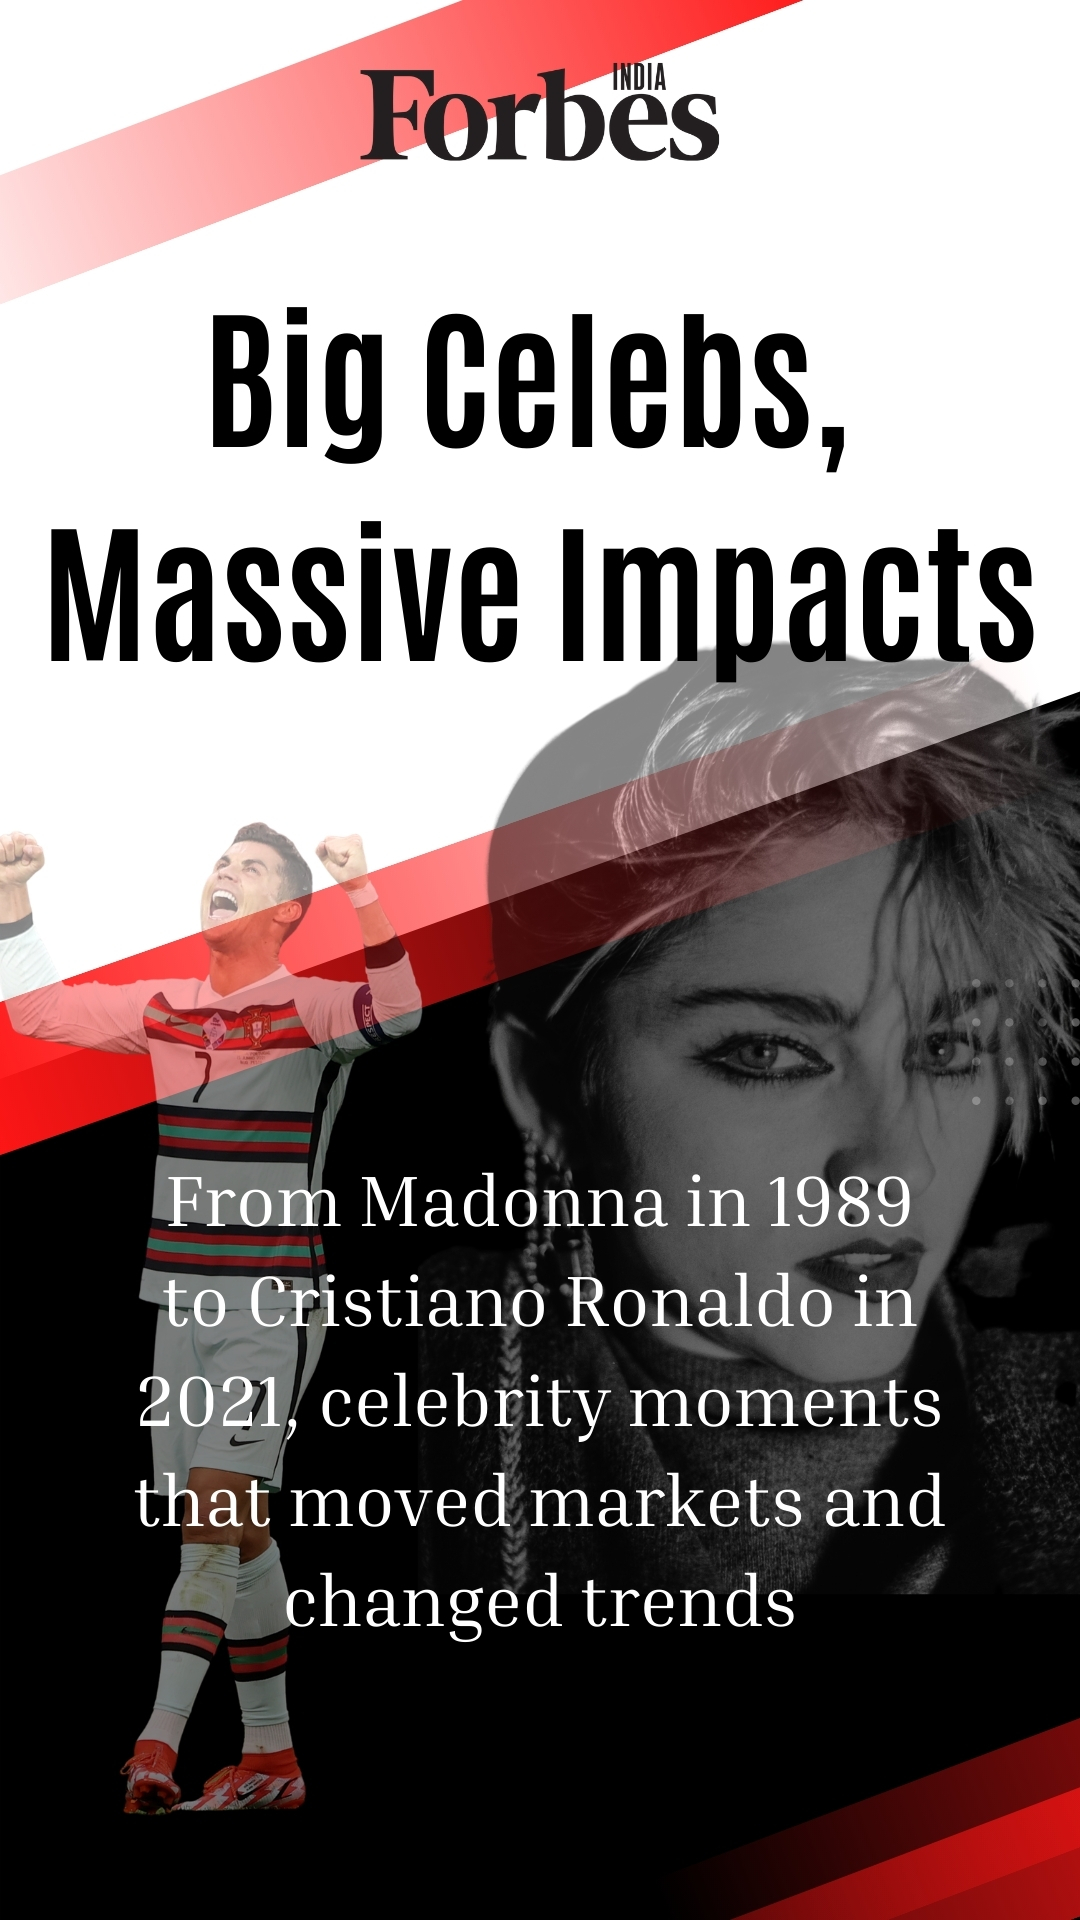 Cristiano Ronaldo and 10 other market-moving celebrity moments